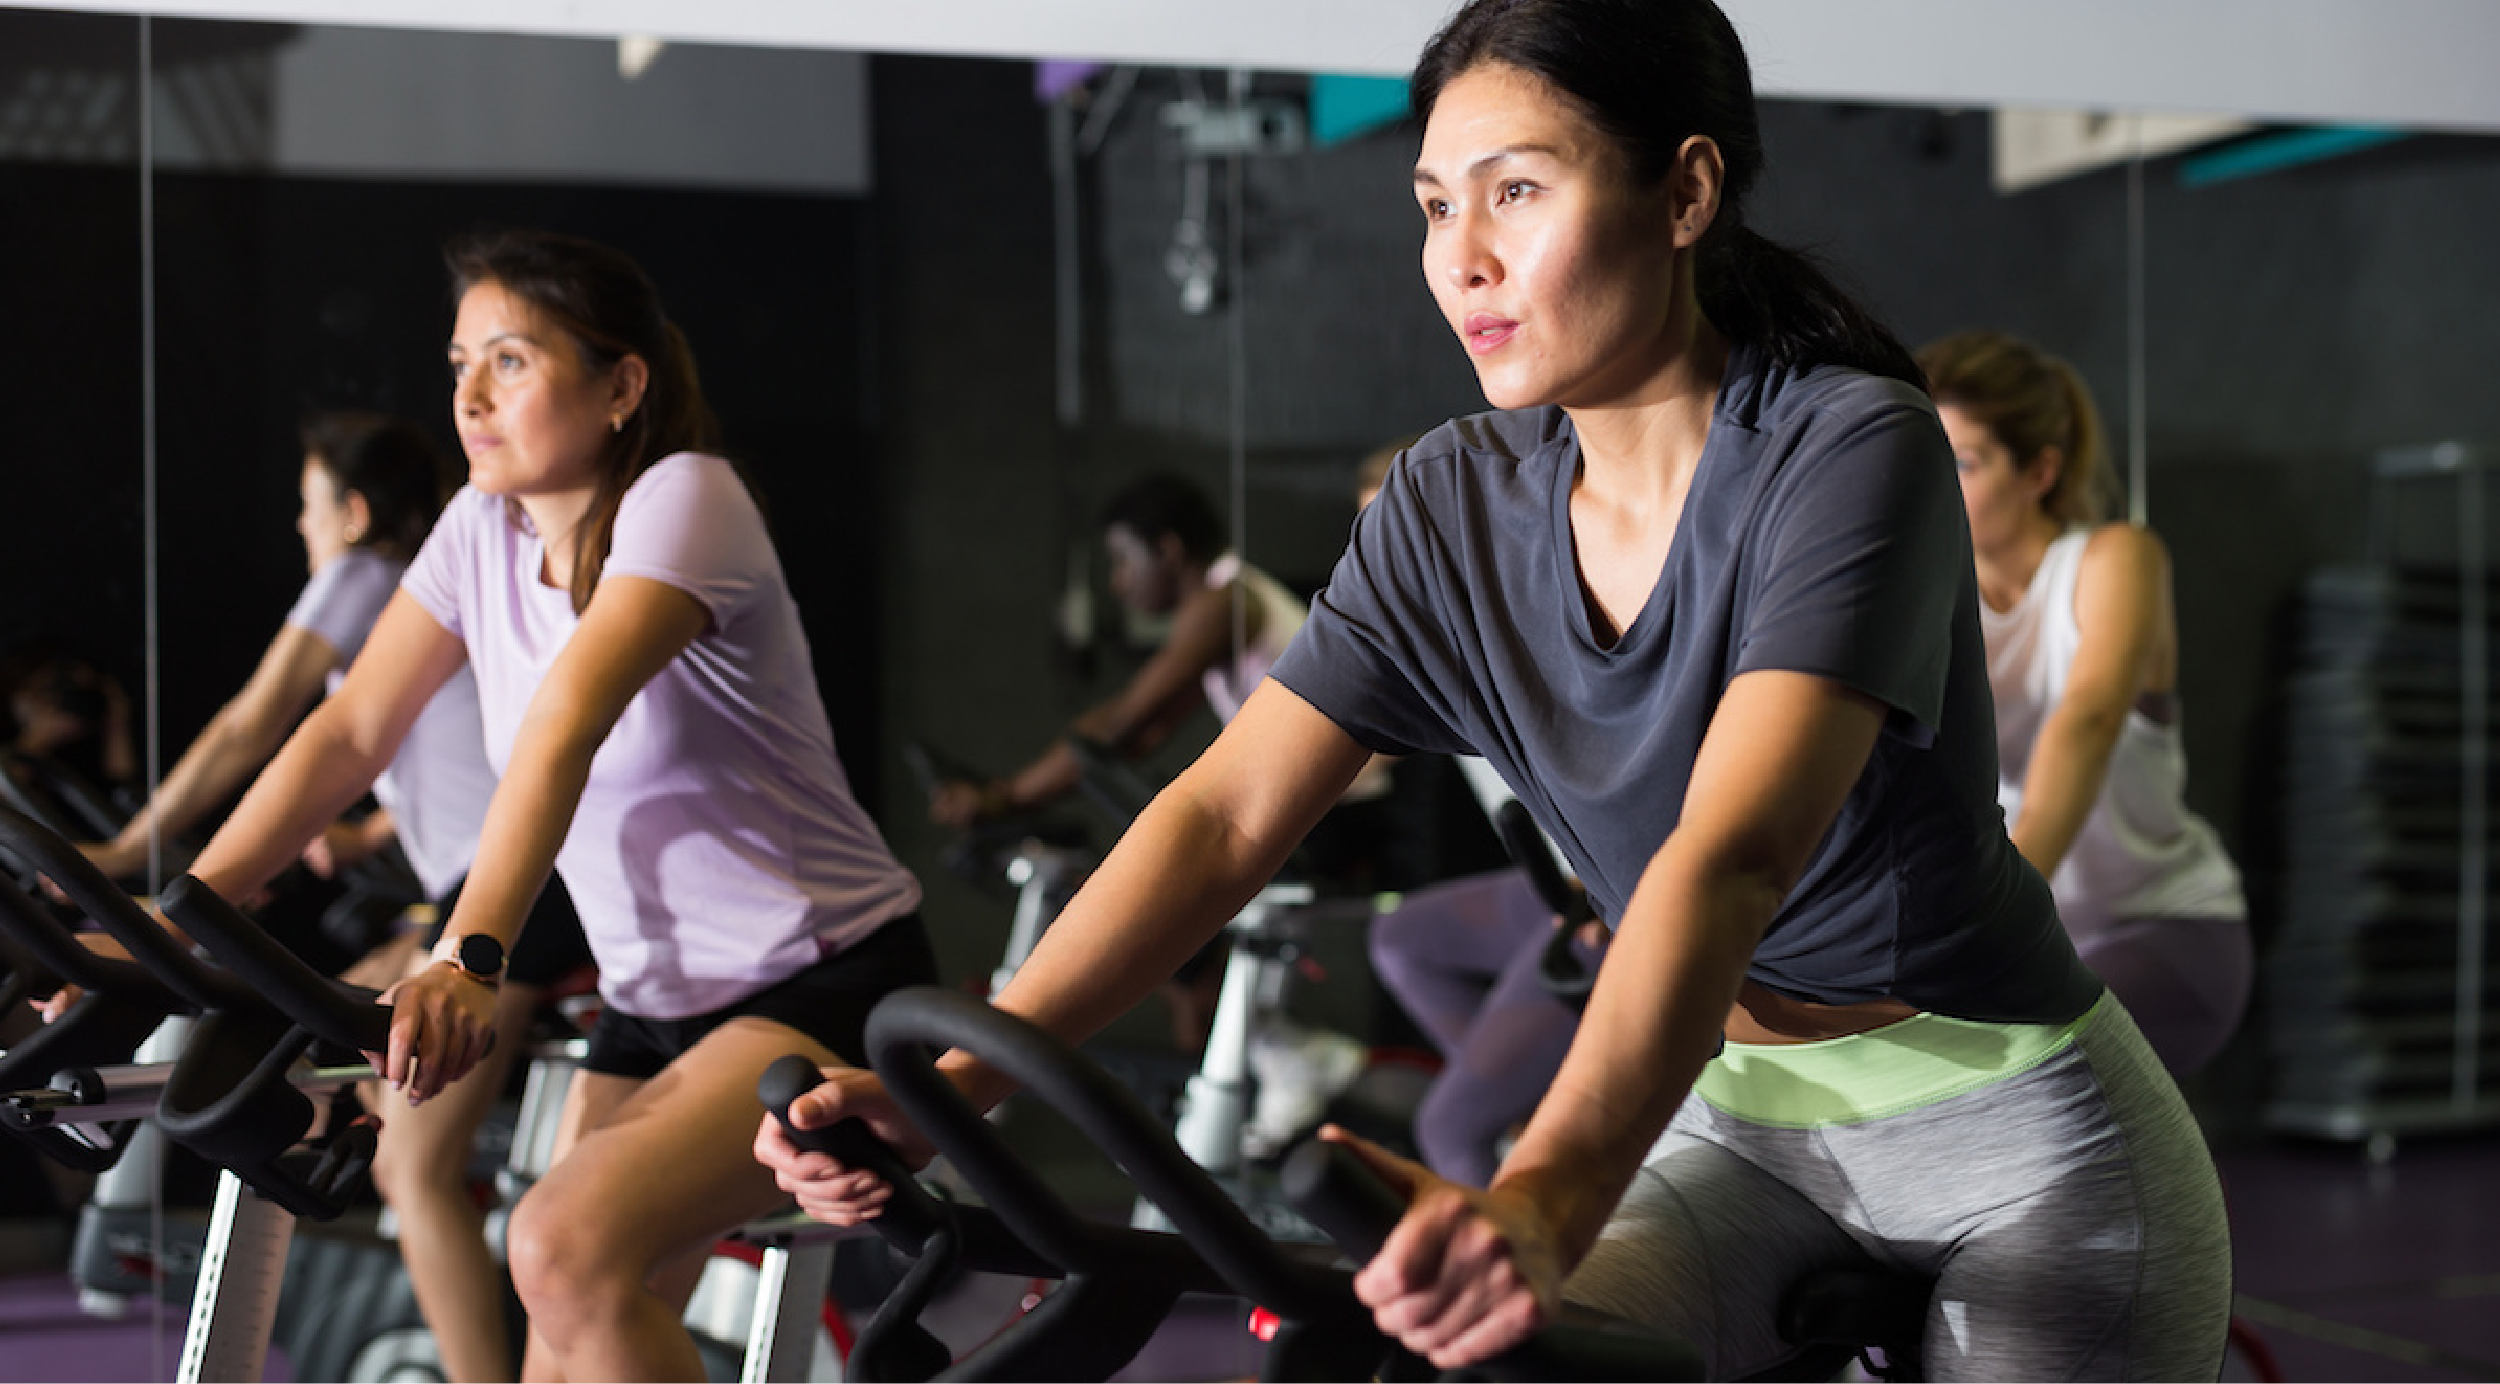 Wanting to try a spinning class? Here are some essential tips to read before your first spin class.